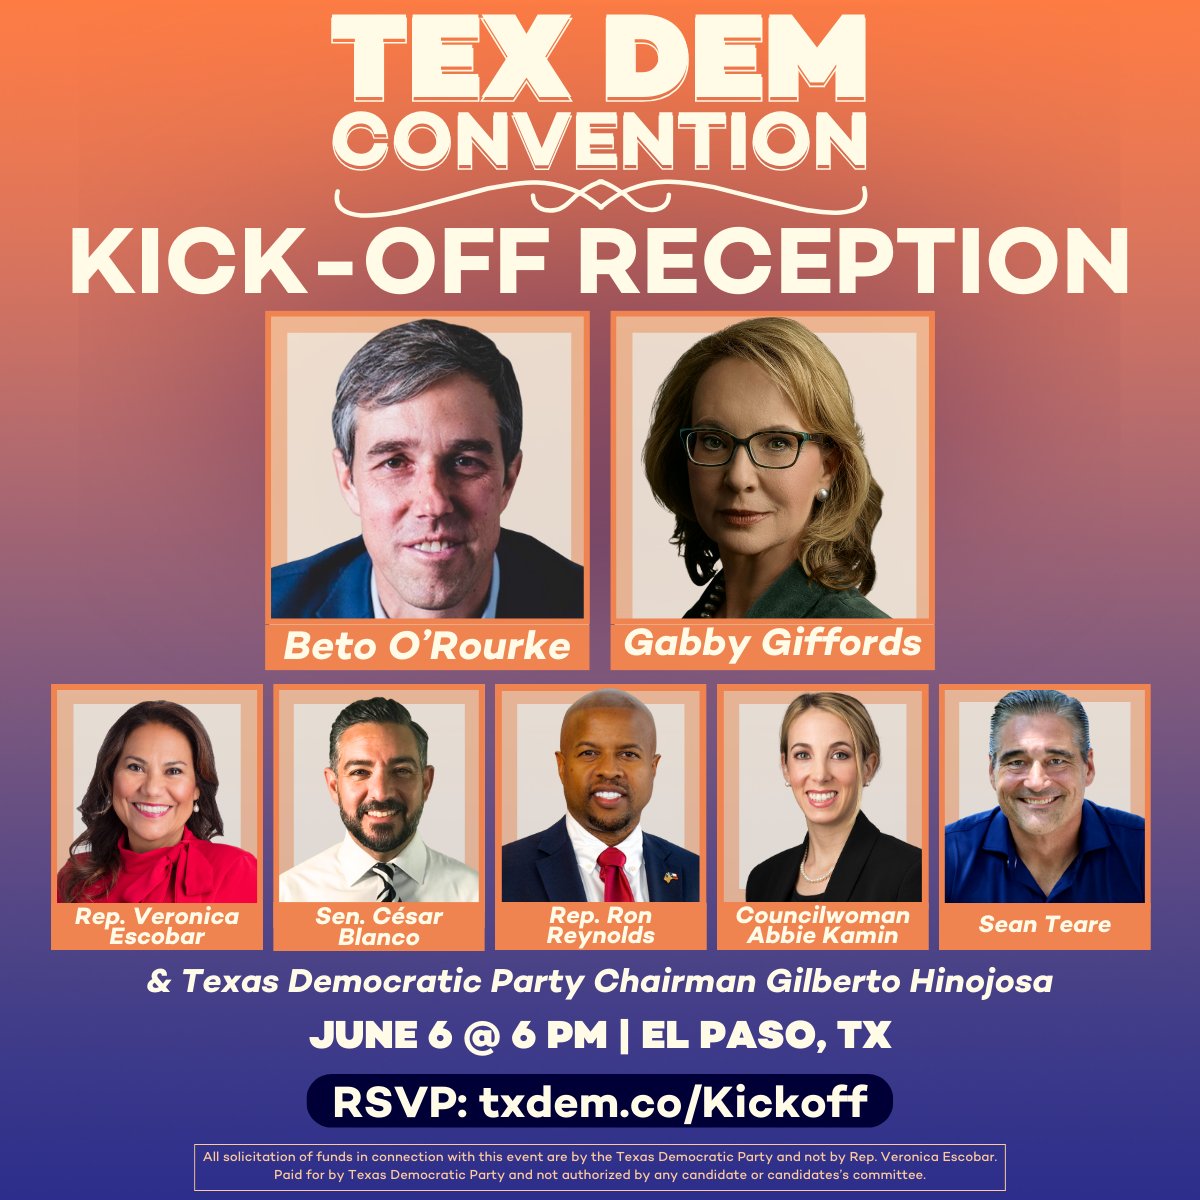 The one and only @GabbyGiffords is joining the line-up for the Texas Democratic Convention Kick-Off Reception! Gabby has been leading the fight to end gun violence – from her time in Congress to her current-day activism. To see Gabby in El Paso, visit txdem.co/kickoff ⭐